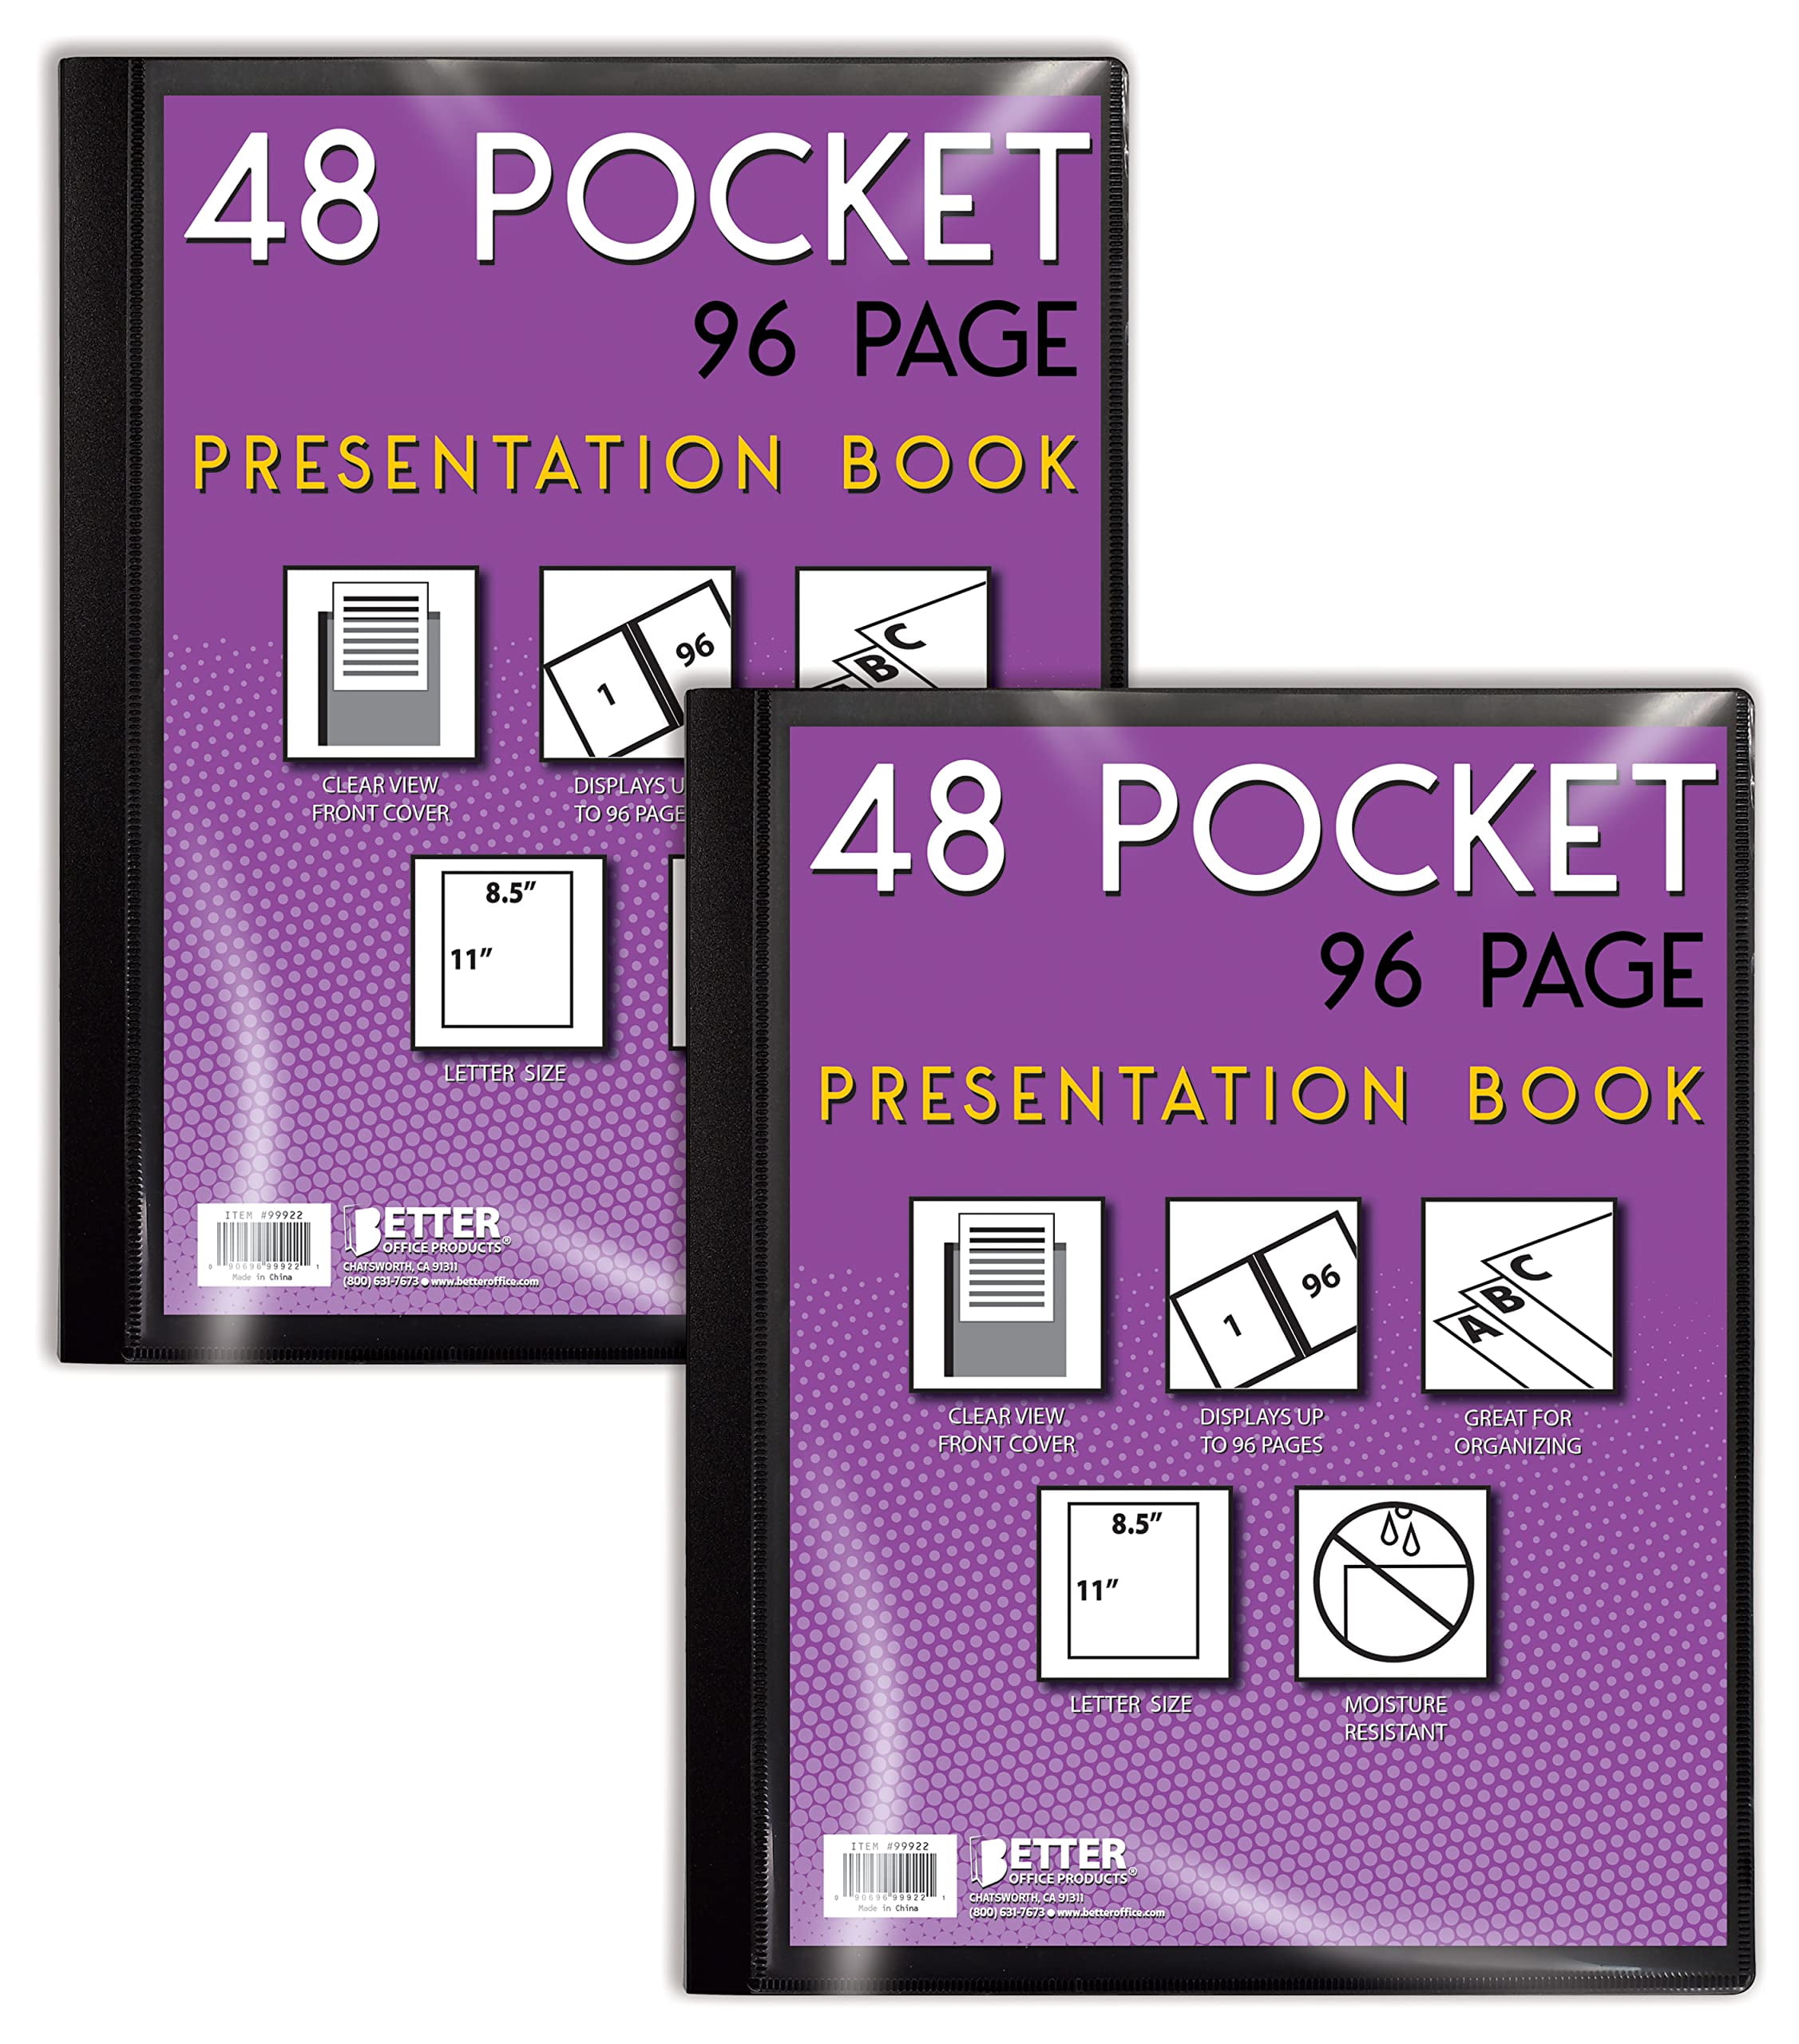 48 Pocket Bound Presentation Book, with Clear View Front Cover, 96 Sheet  Protector Pages, 8.5 x 11 Sheets, by Better Office Products, Art  Portfolio, Durable Poly Covers, Letter Size 